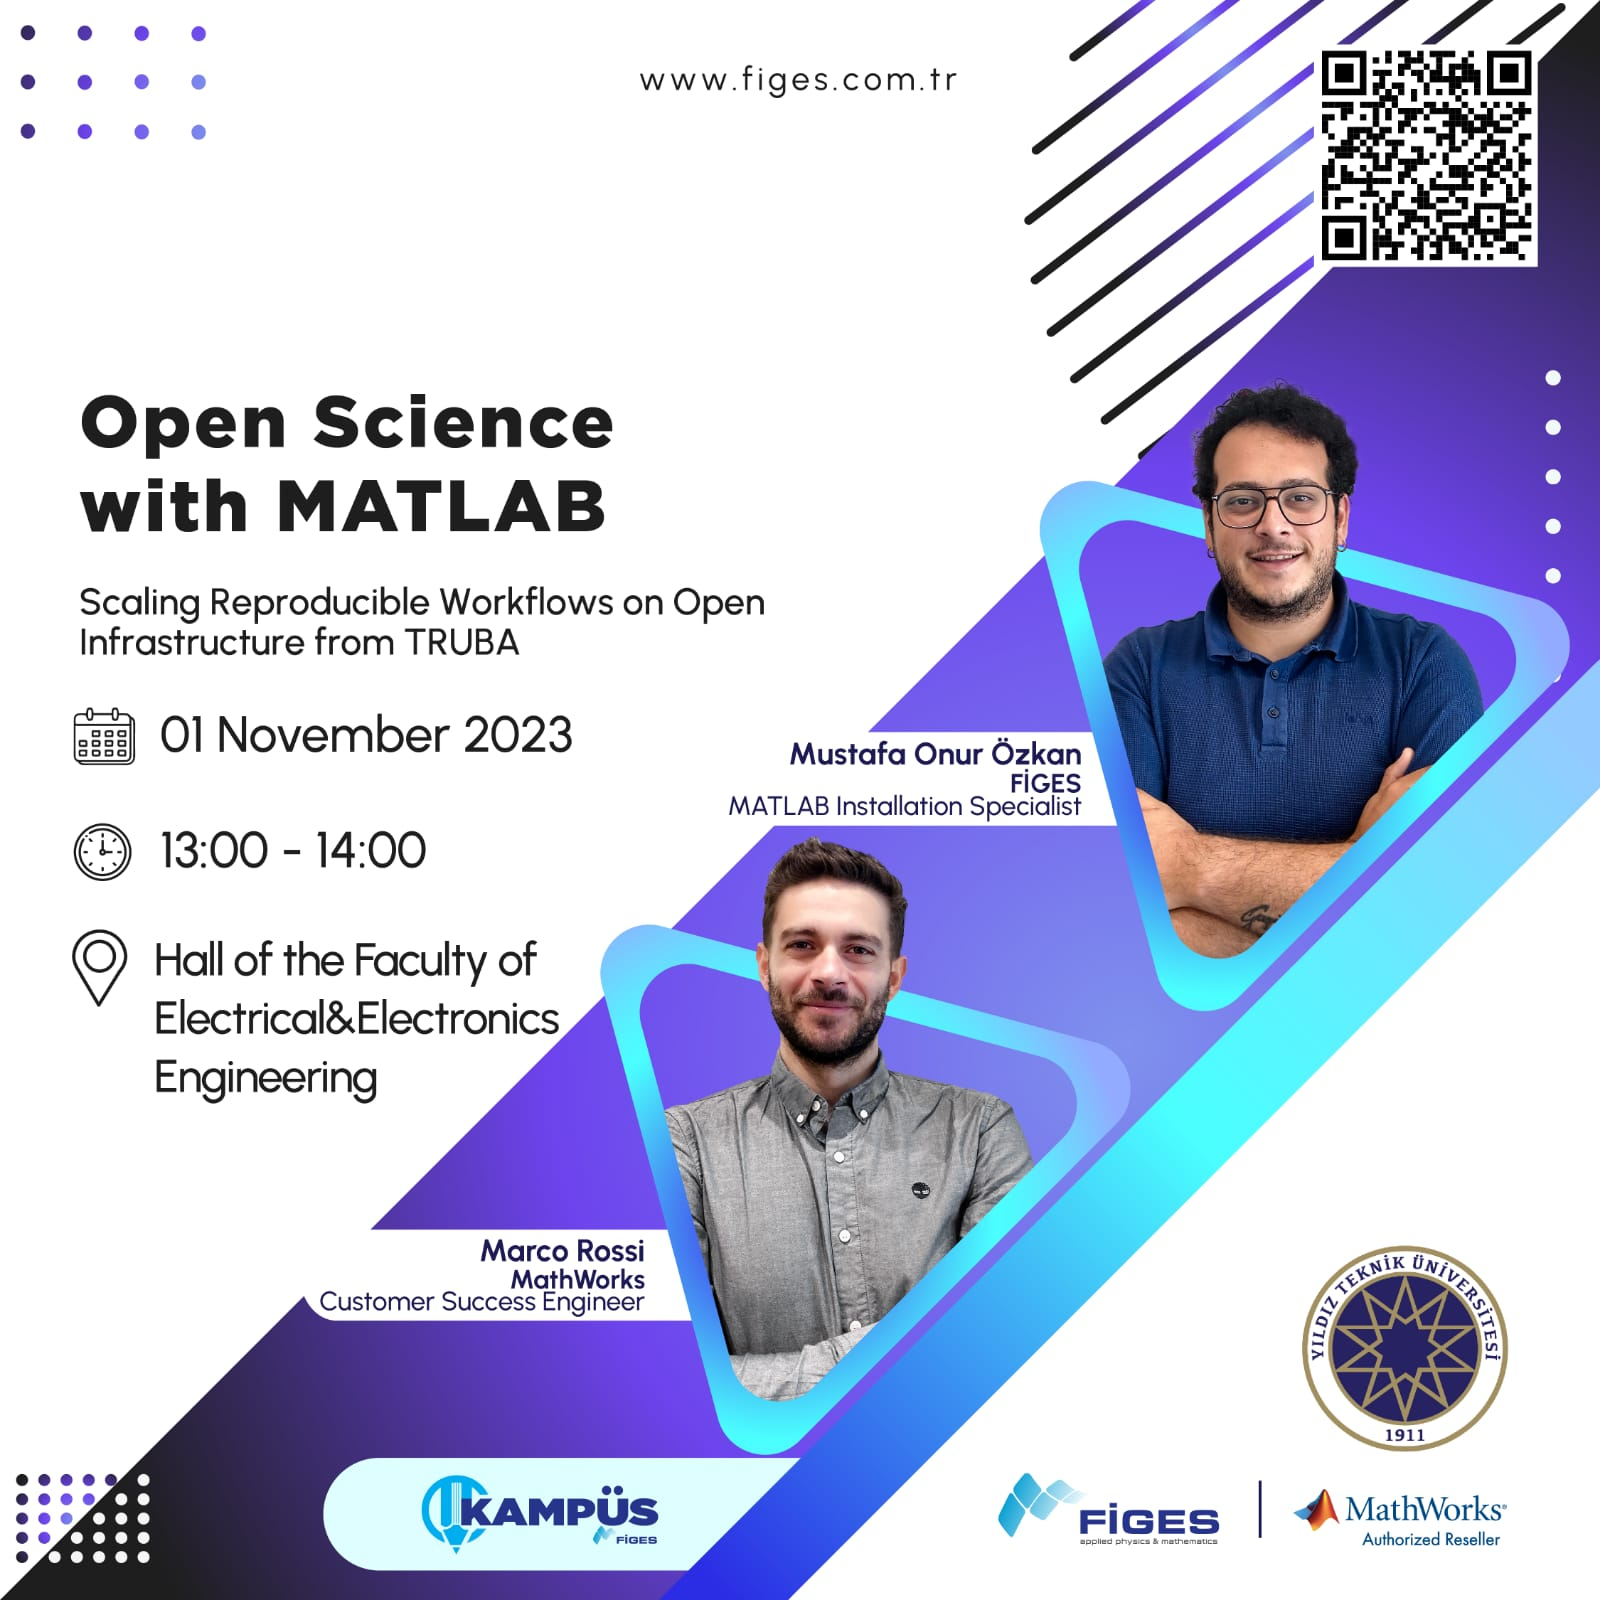 Open Science with MATLAB